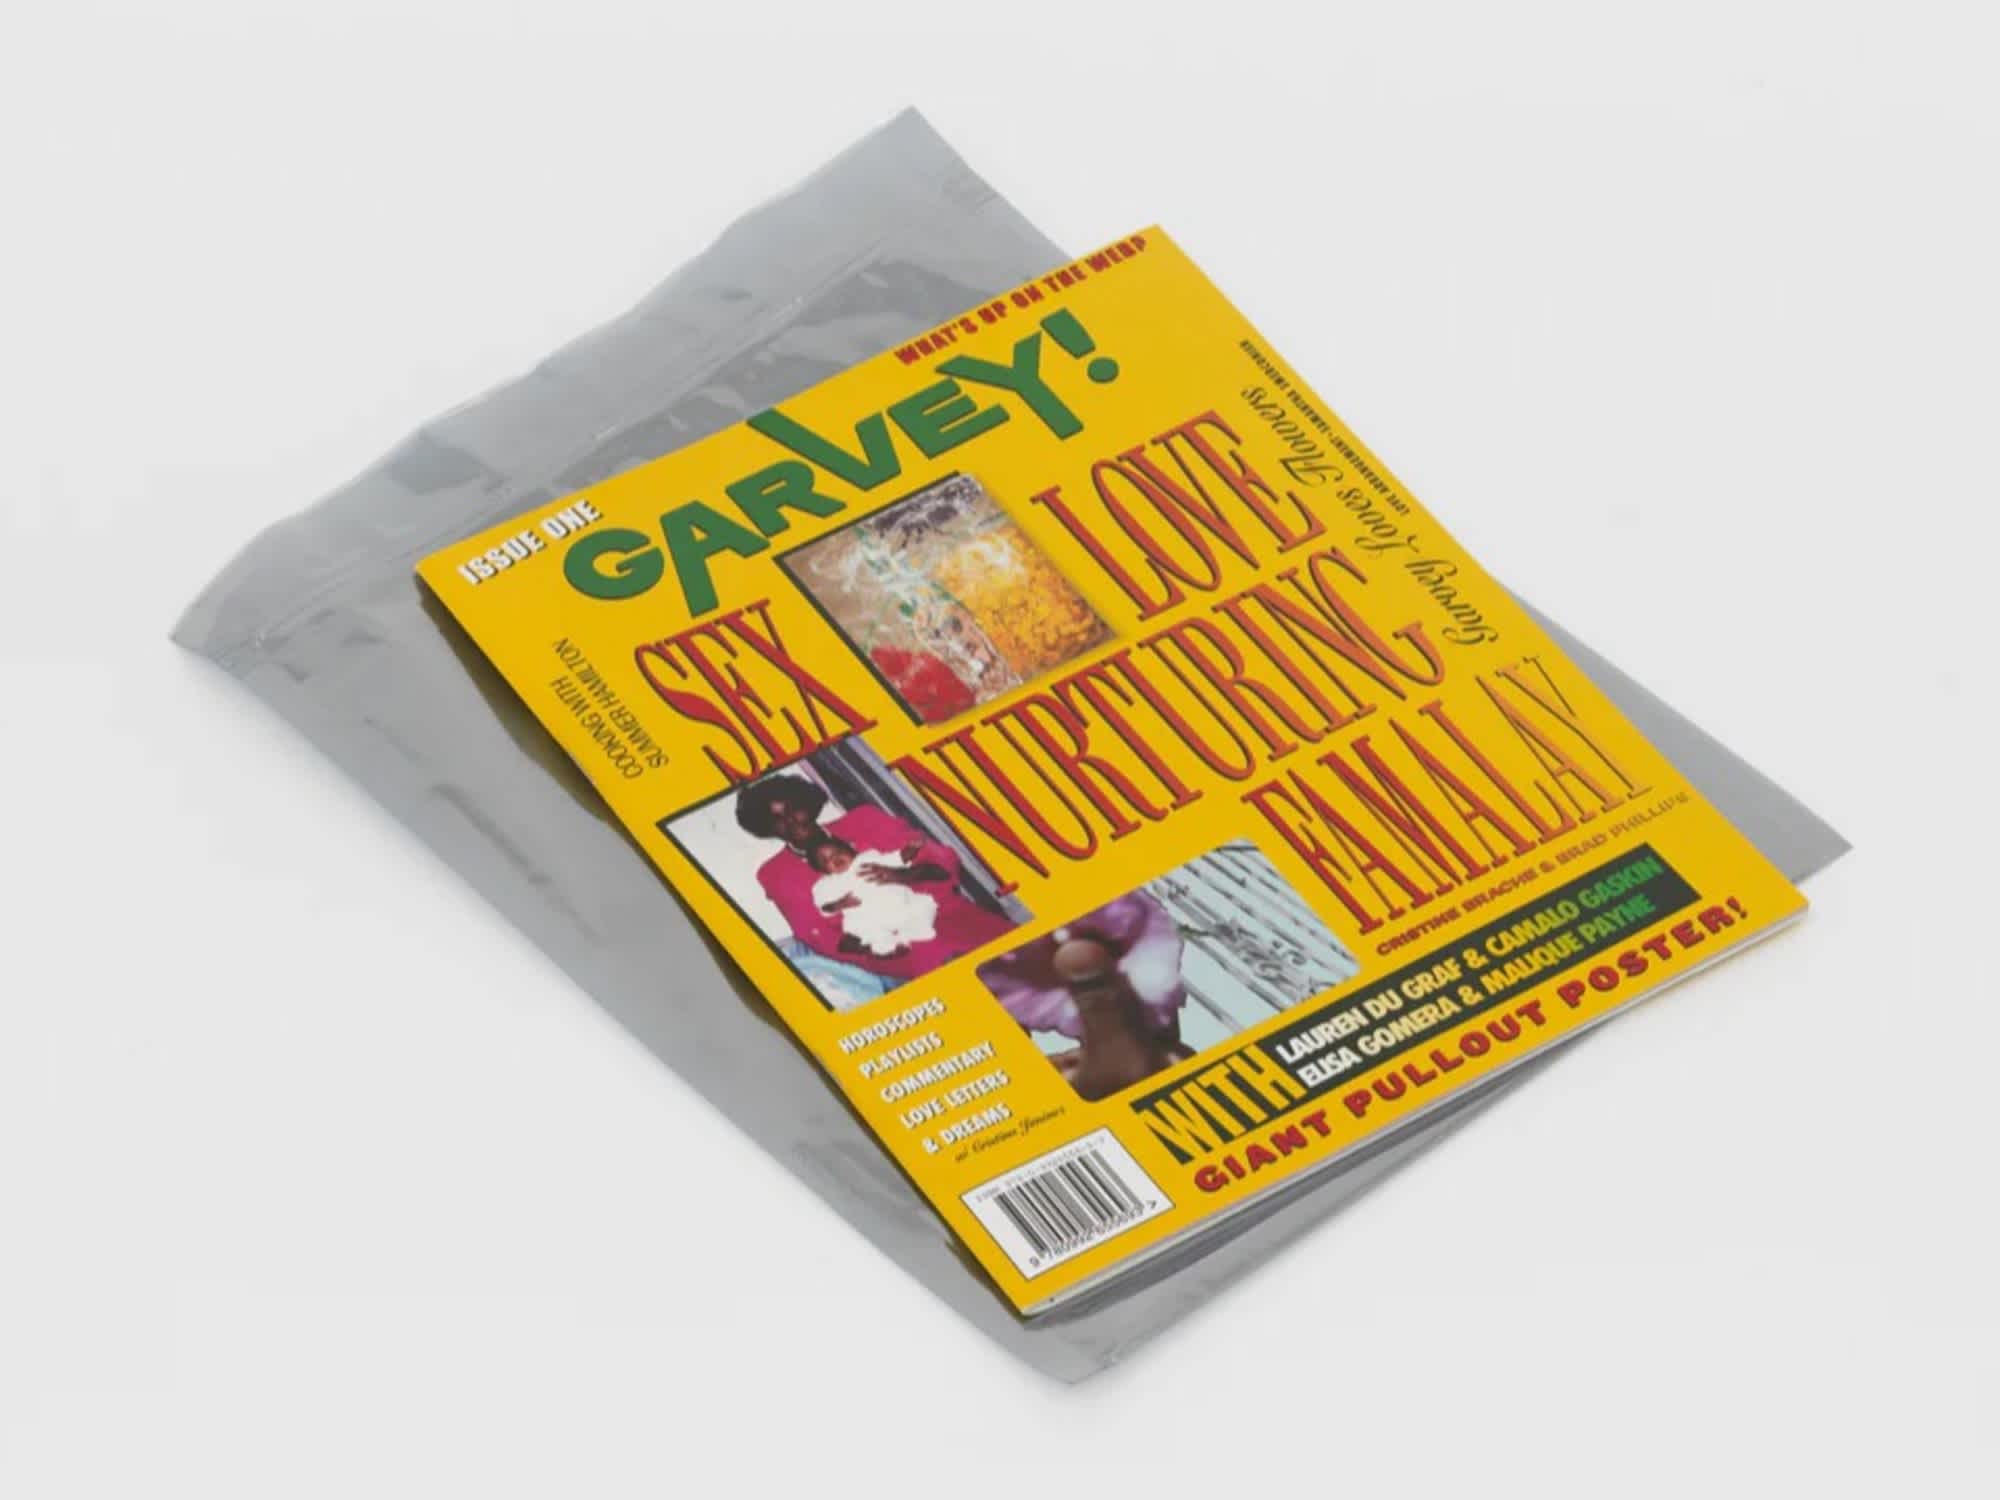 Bright yellow book on top of a plastic film. The text on the cover is red and green and laid-out like a tabloid magazine.